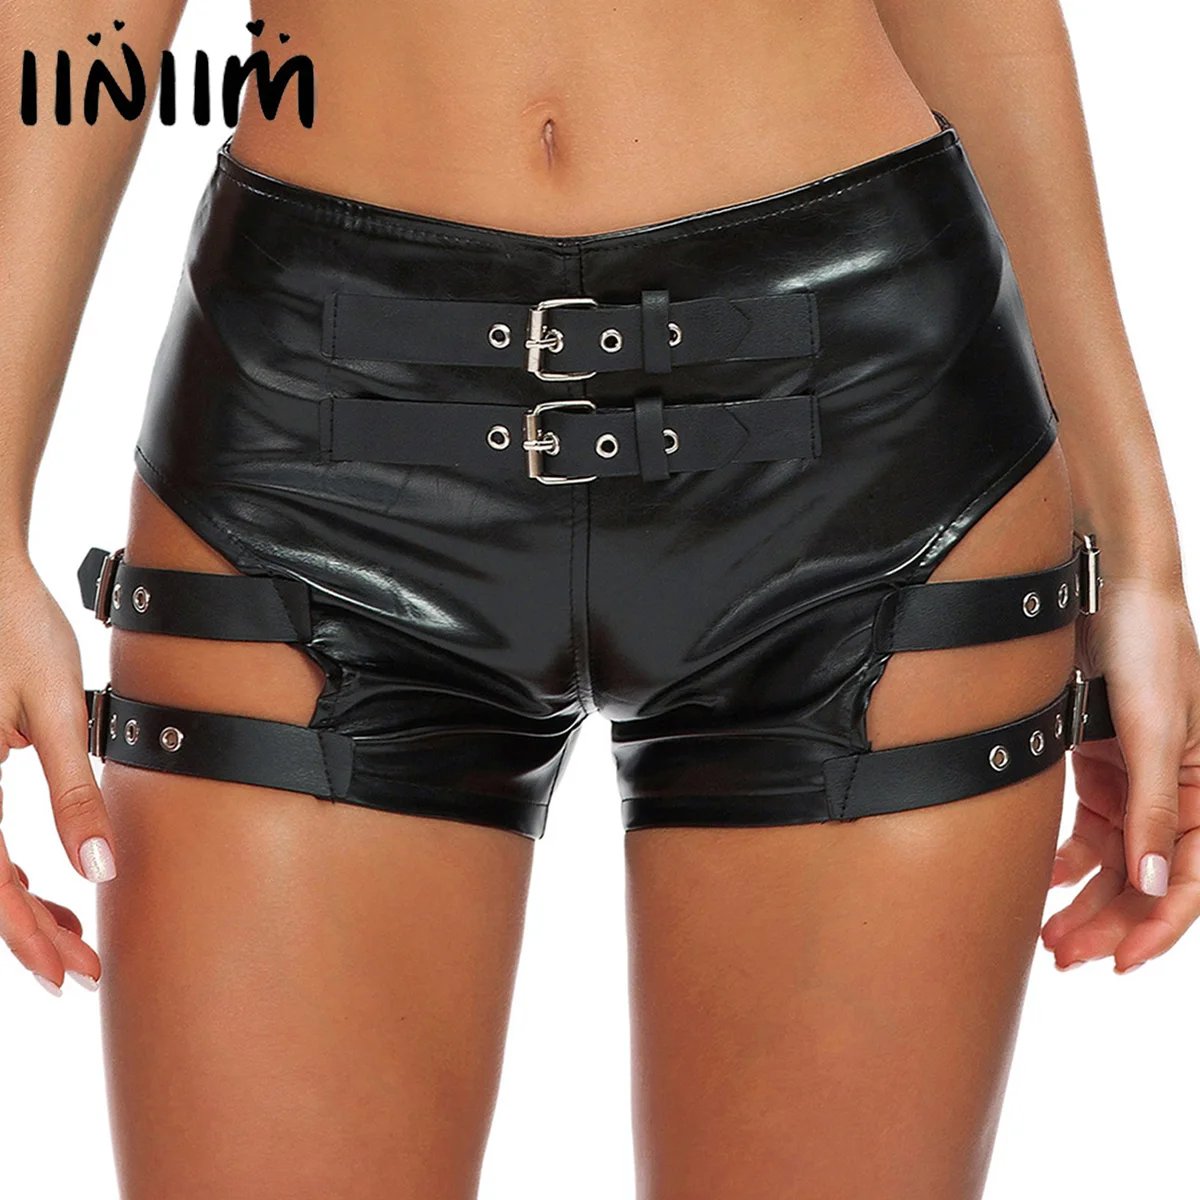 

Womens Femme Fashion Shorts Pole Dancing Patent Leather Strappy Booty Shorts Ladies Party Nightclub Hot Pants Clubwear Costumes